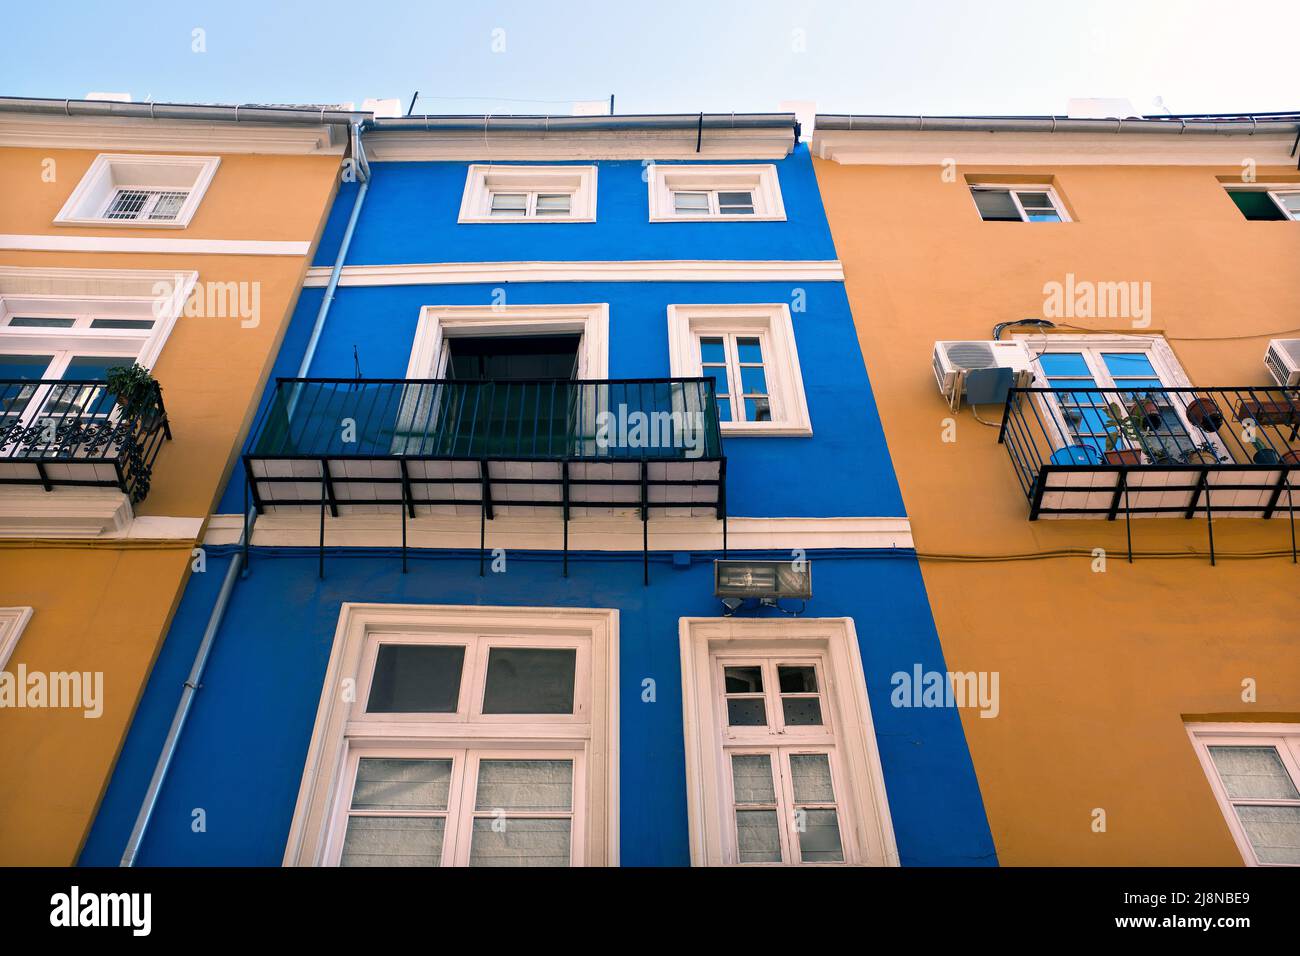 Low Angle View of Colorful Building Exteriors with paned Windows and small balconies, Valencia, Spain Stockfoto